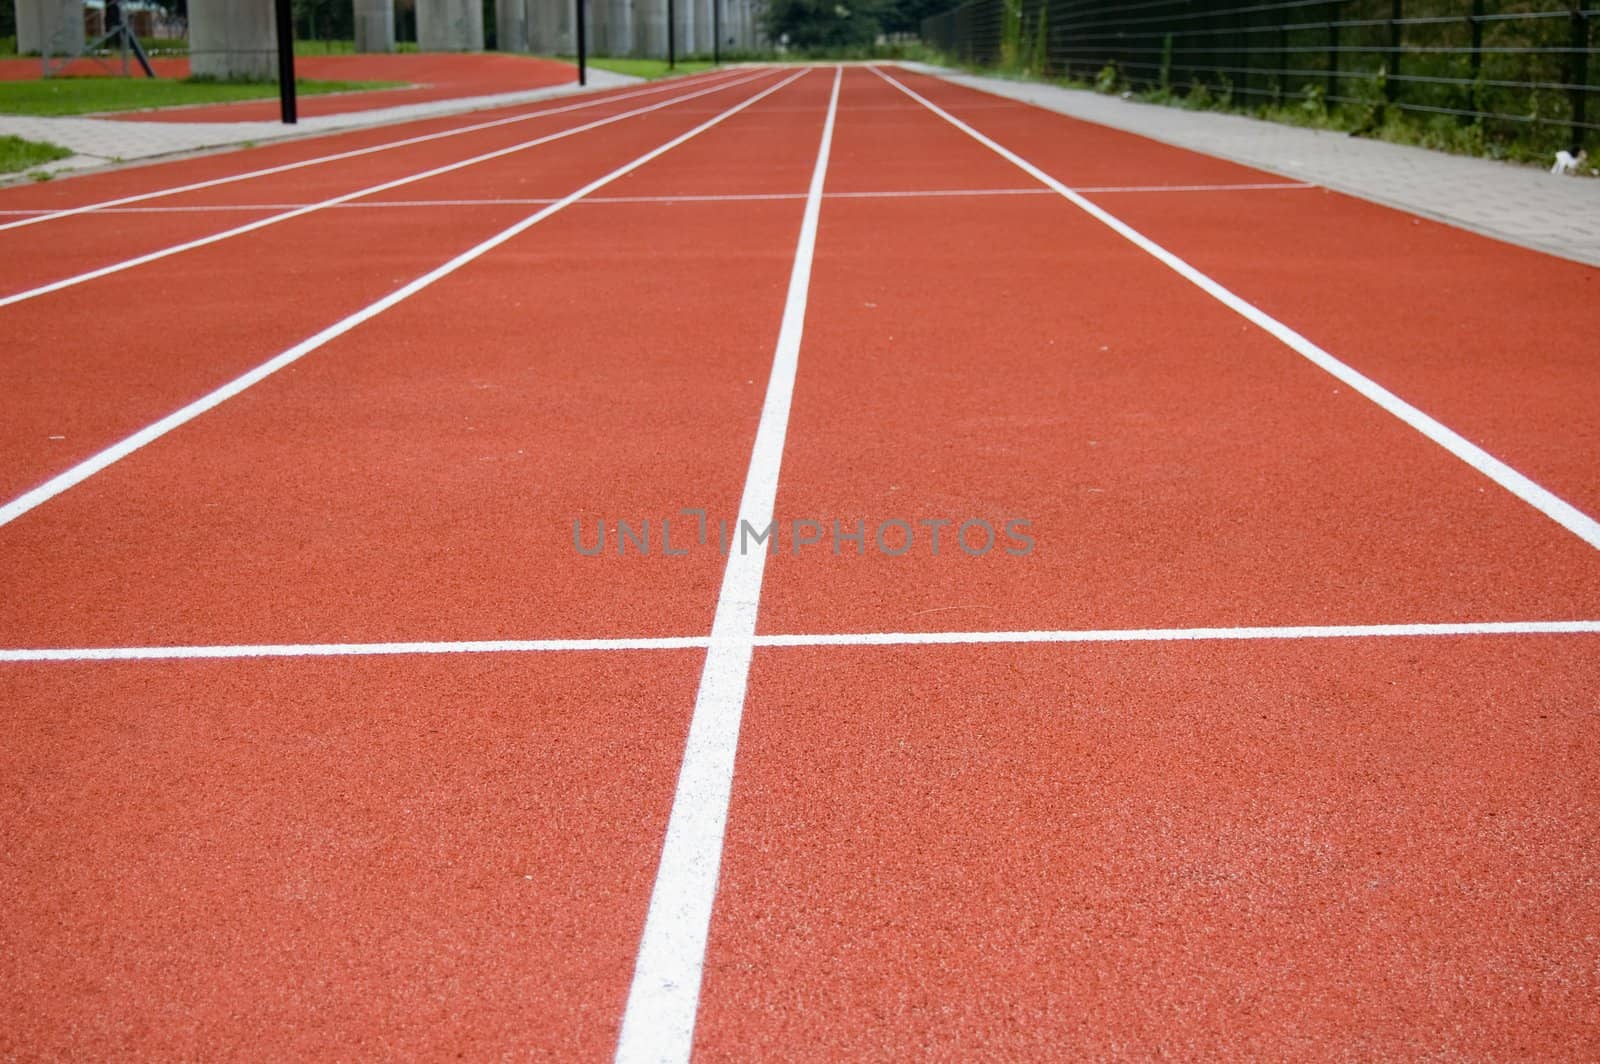 short track on an official athletic track